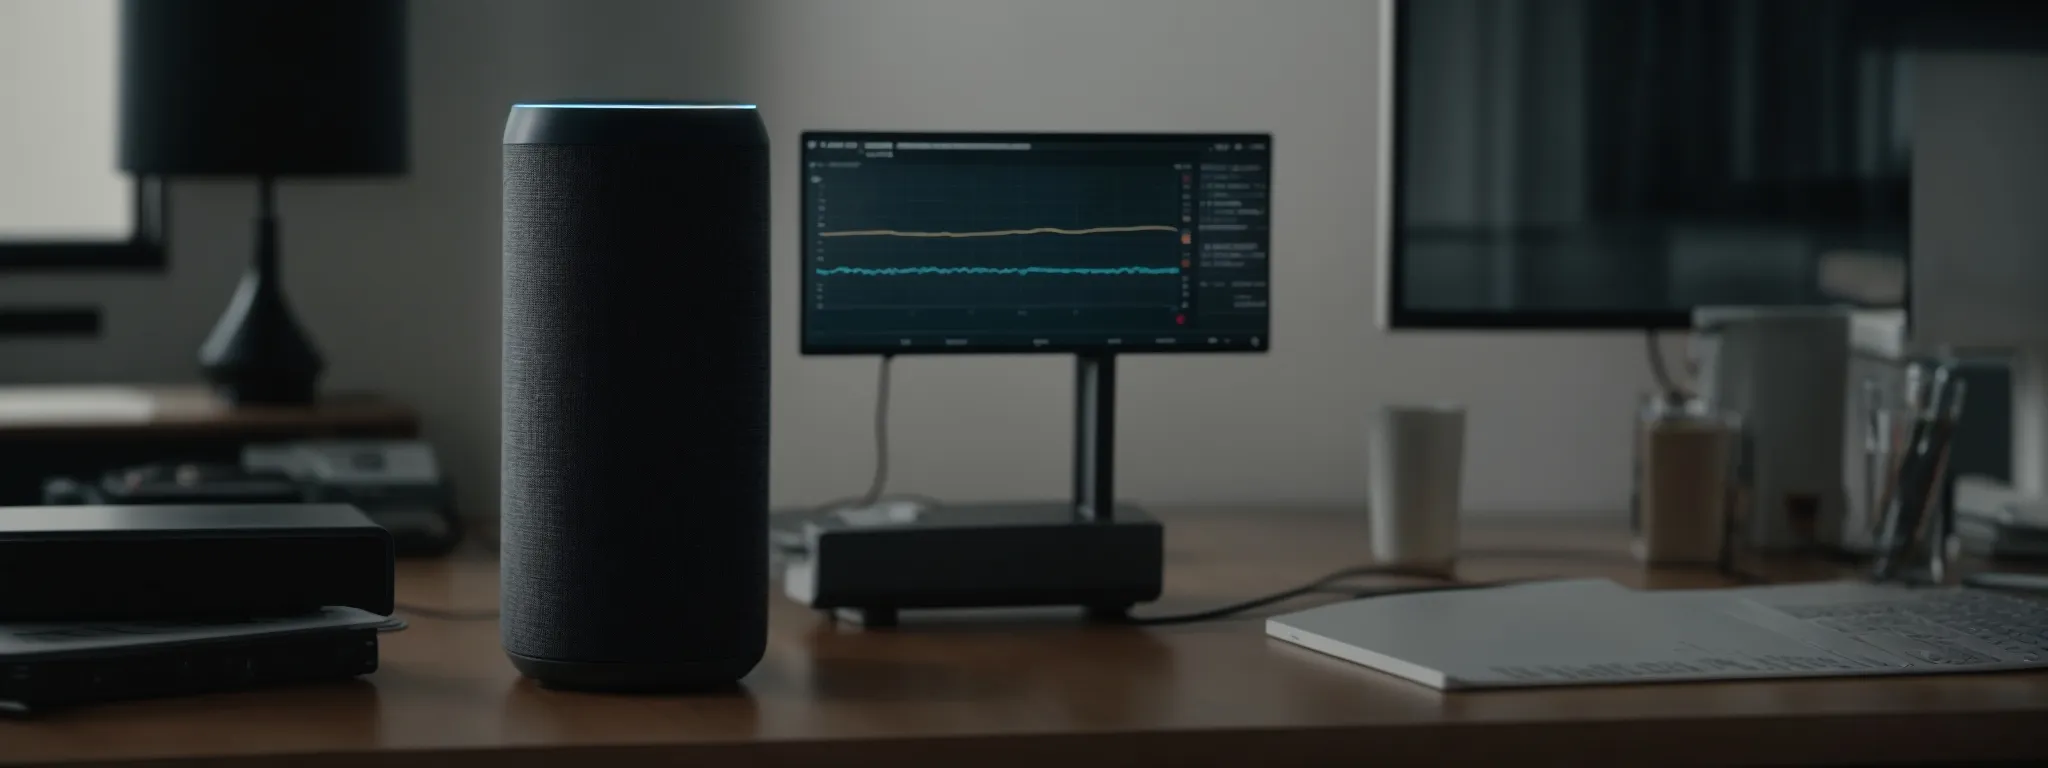 a person speaking into a smart speaker on a desk, with a screen in the background displaying a graph and analytics data.